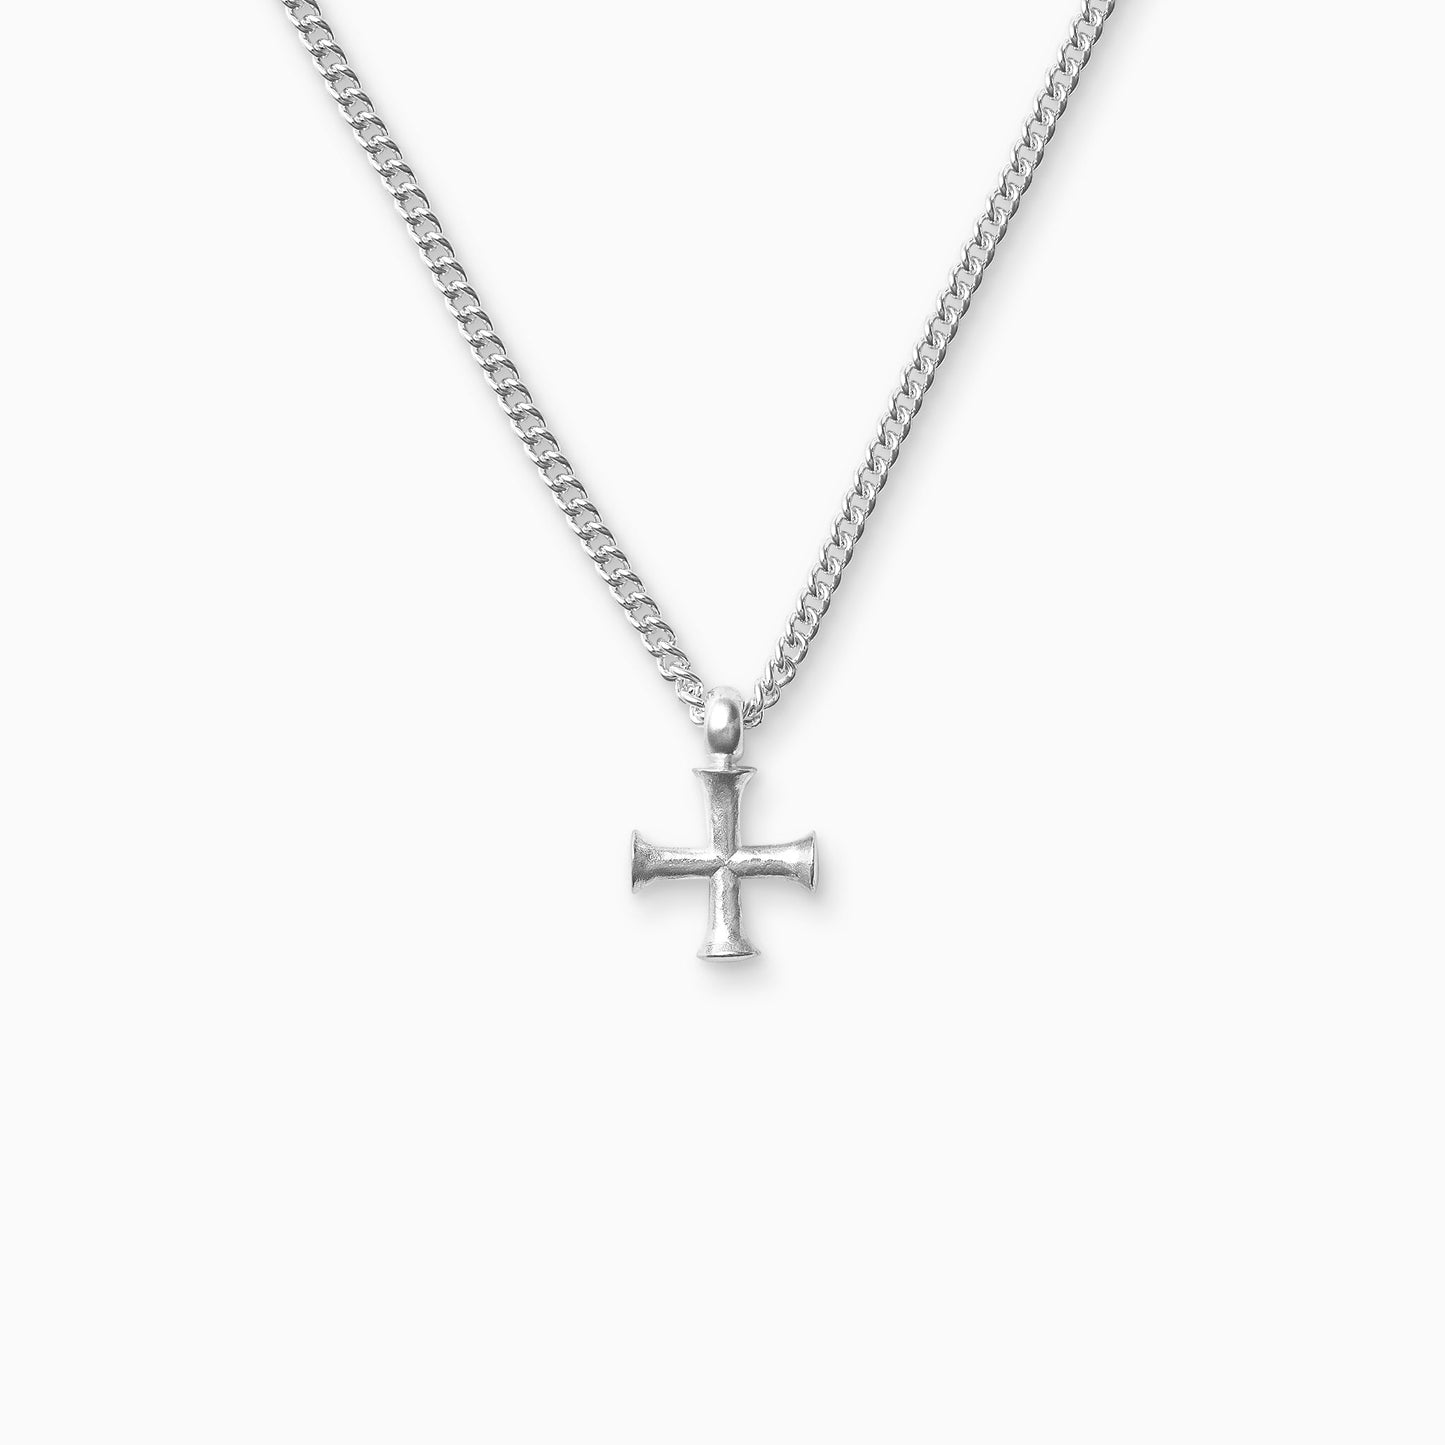 Recycled Silver Byzantine cross, 21mm length on a 55cm heavy curb chain. The cross has equal length arms with outward spreading ends 